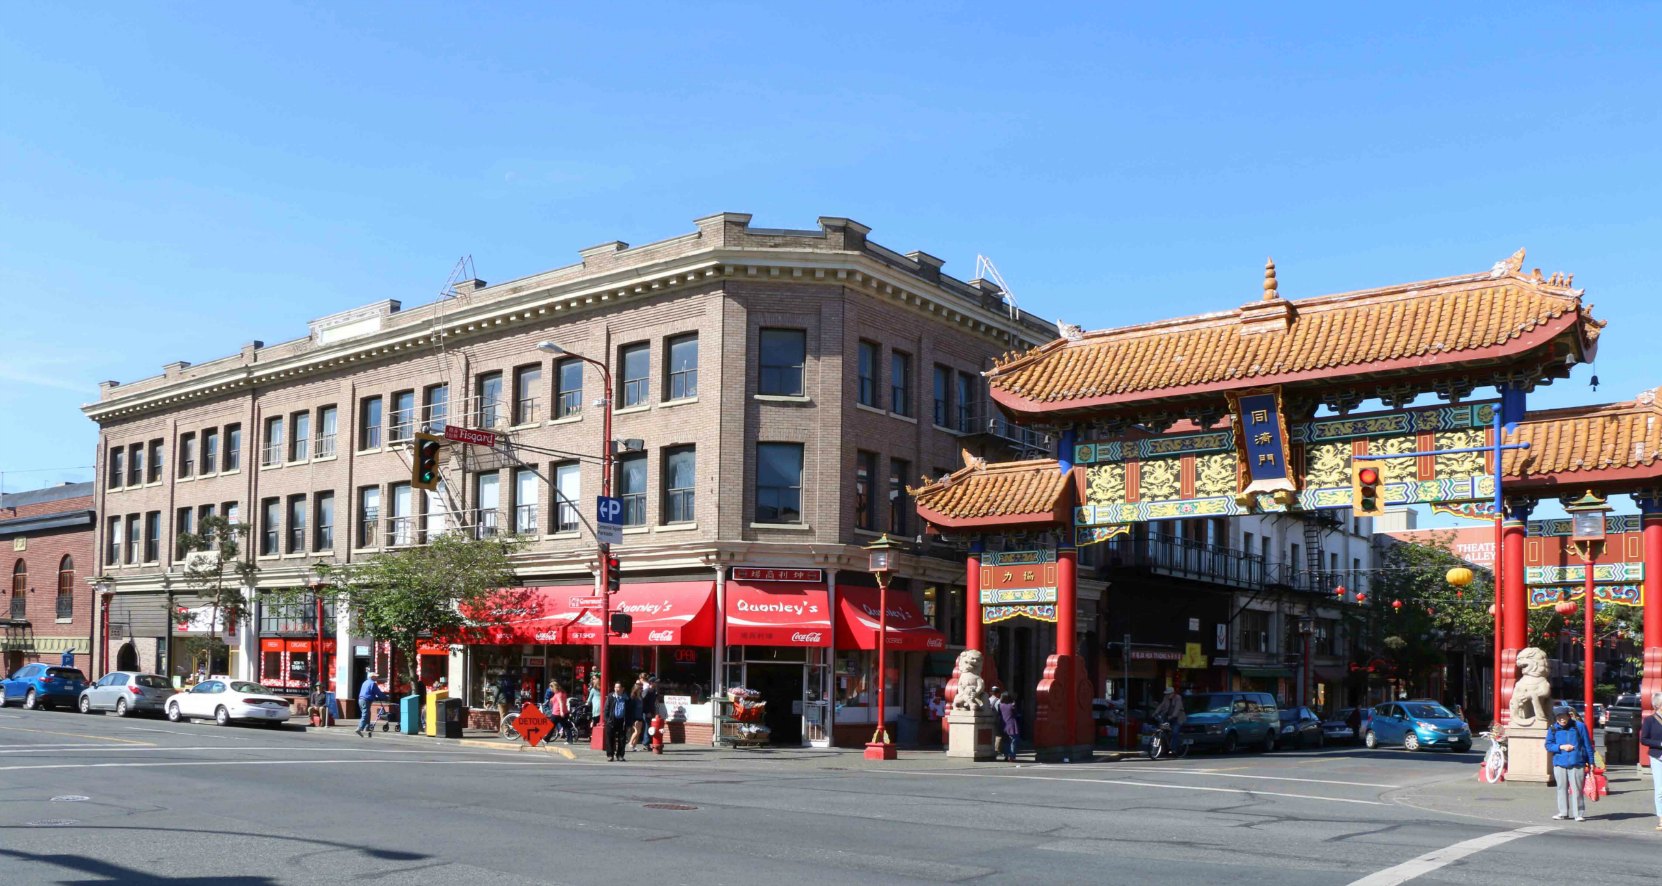 The Lee Block was built in 1910 by architect C. Elwood Watkins for Lee Ching and Lee Wong. It is listed on the Canadian Register of Historic Places as the Lee Block. (photo by Victoria Online Sightseeing Tours)